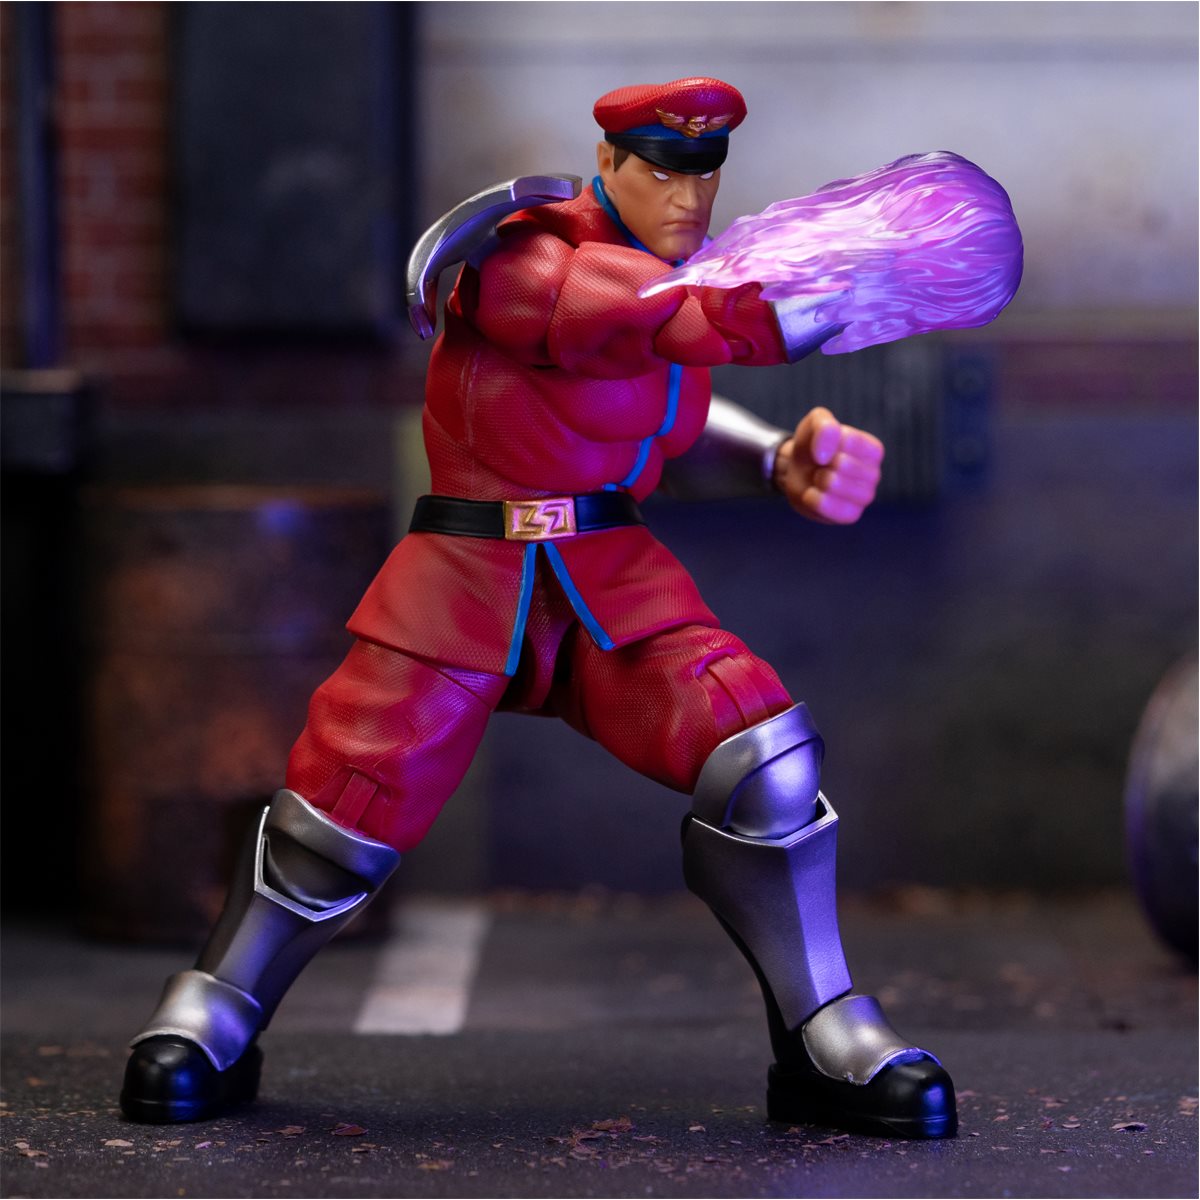 Ultra Street Fighter II M. Bison 6-Inch Scale Action Figure by Jada Toys